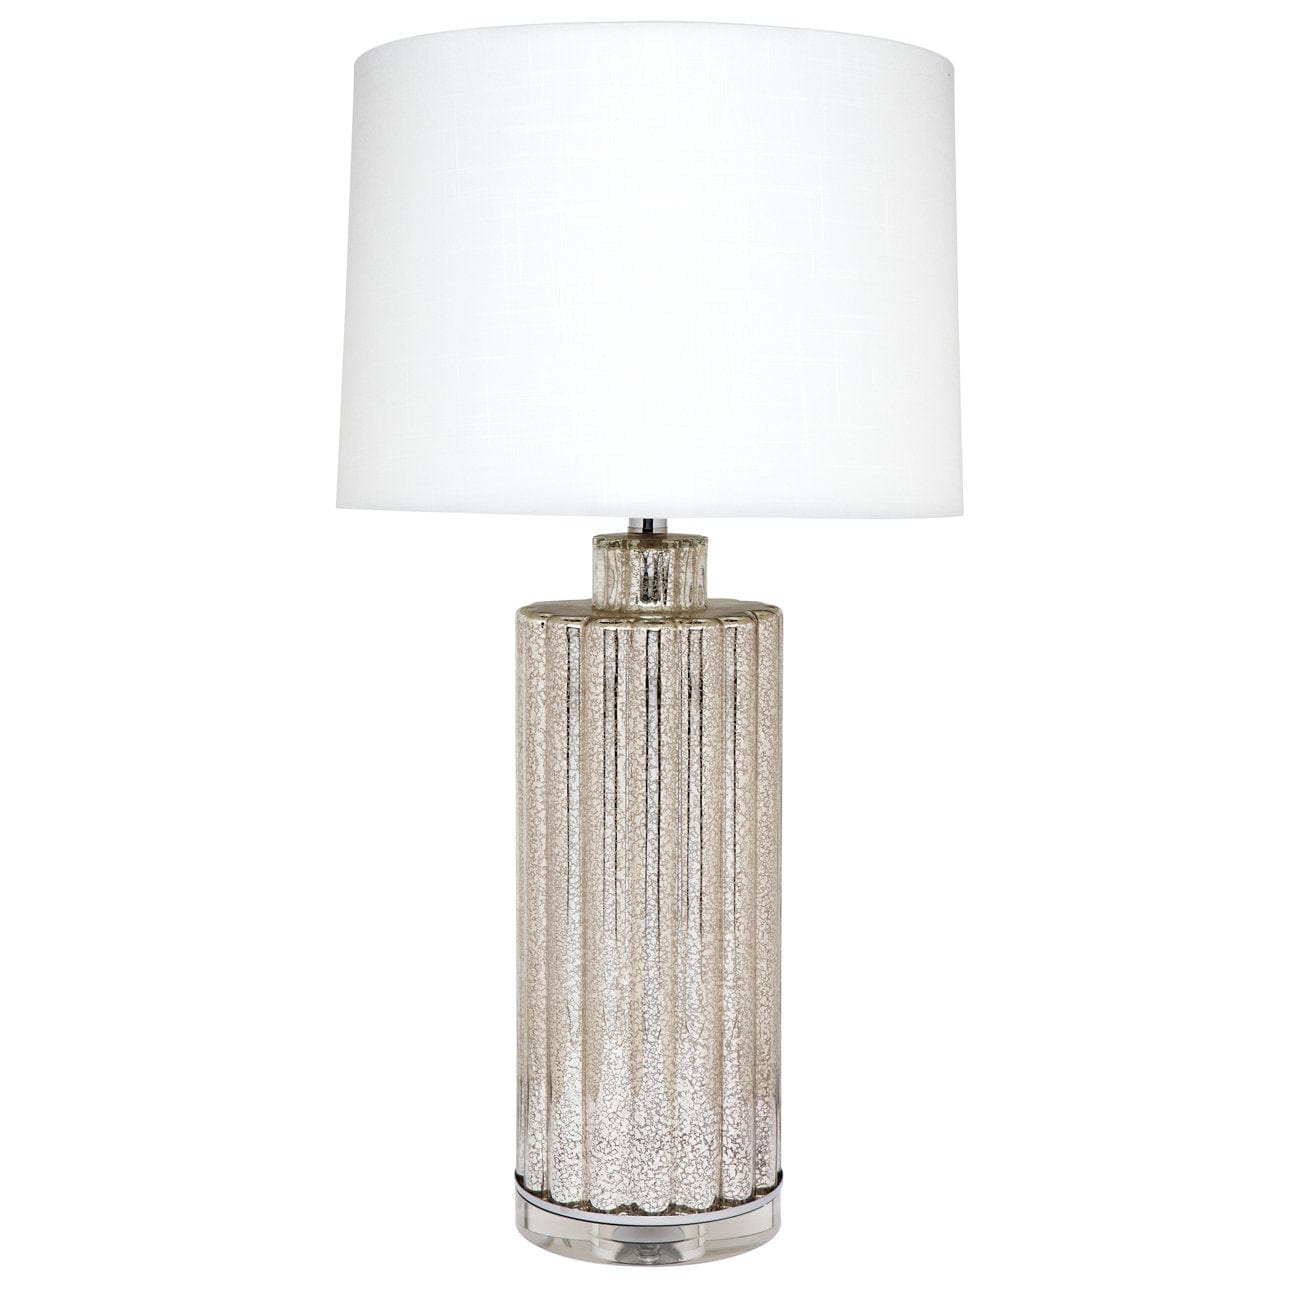 CAFE LIGHTING & LIVING Table Lamp Allure Table Lamp 11907